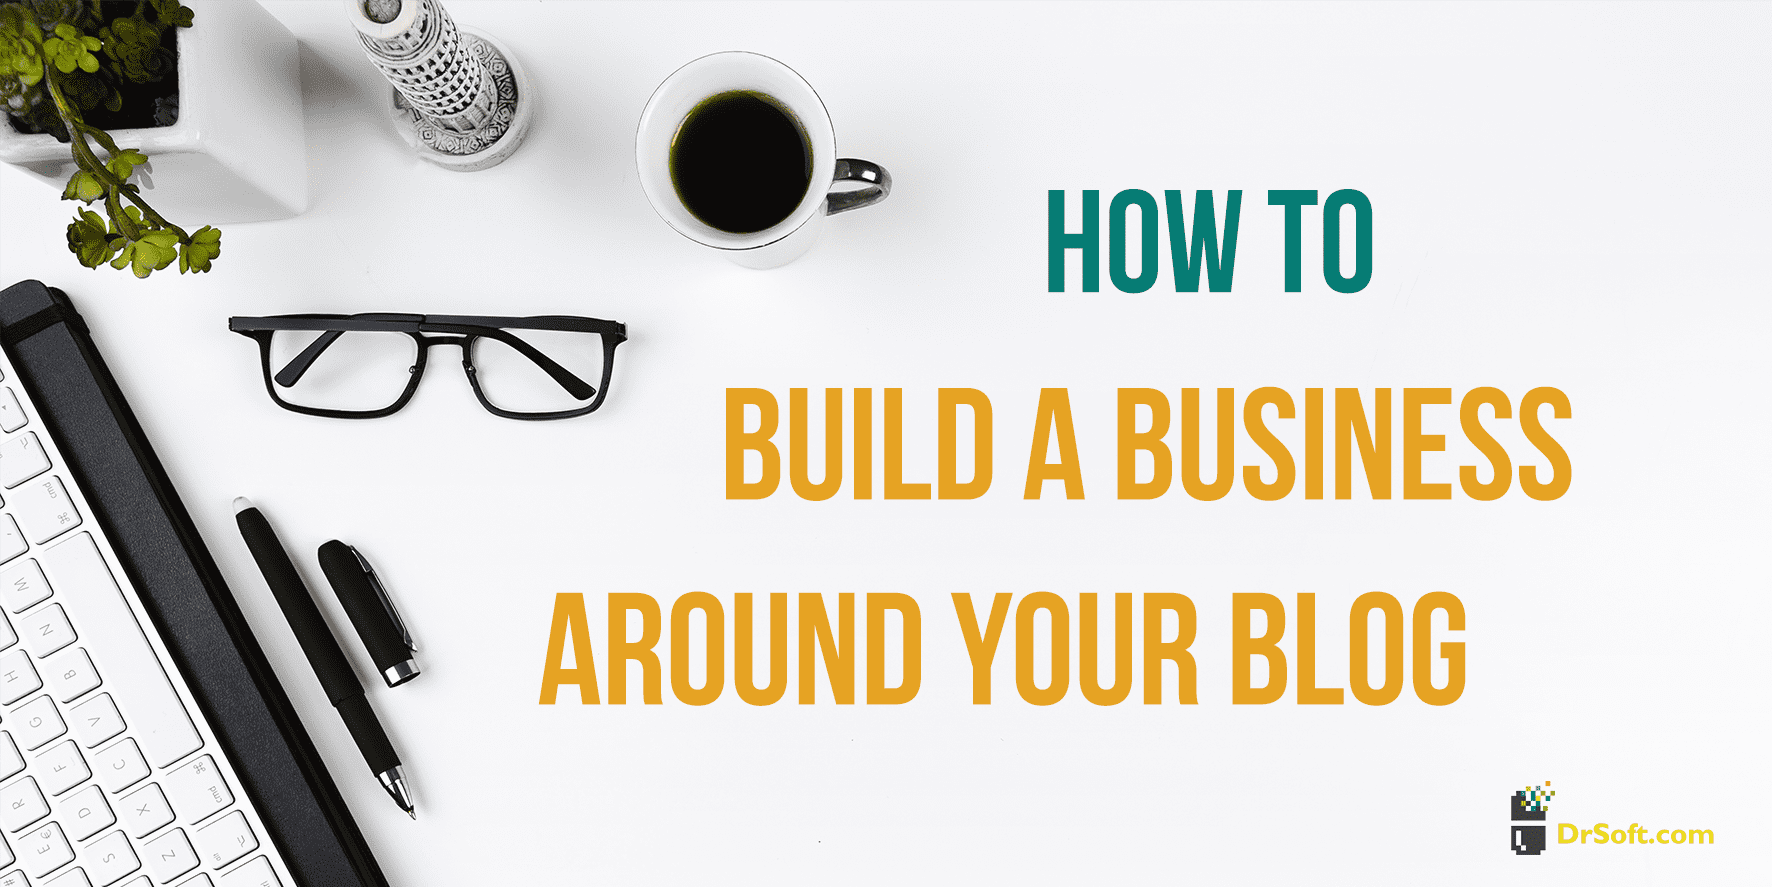 How to Build a Business Around Your Blog